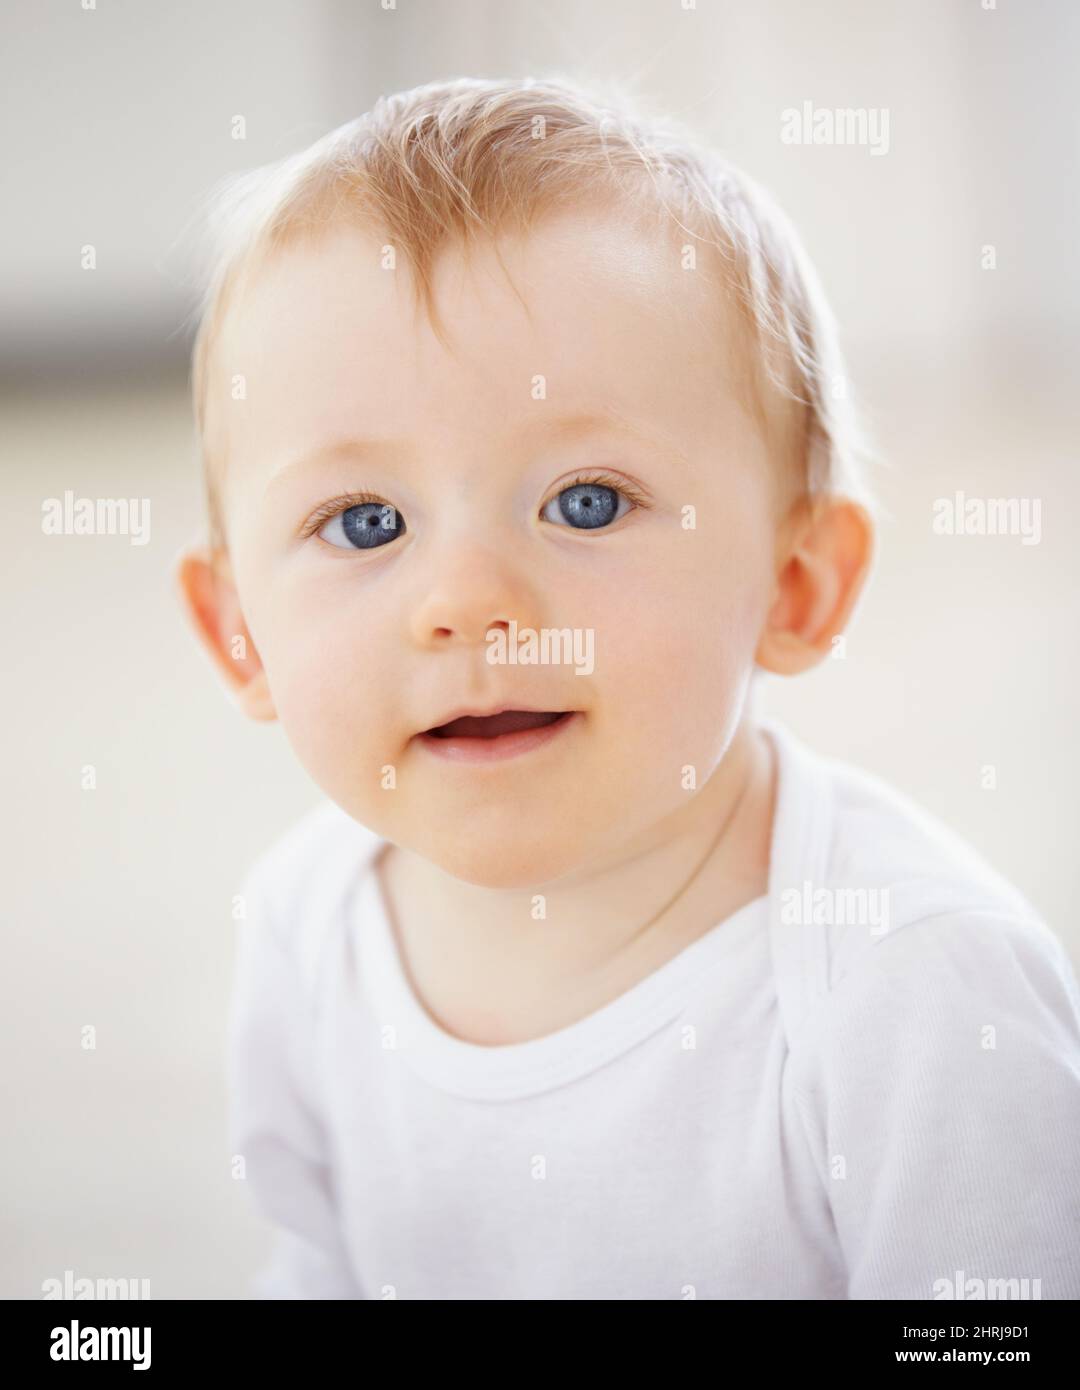 Who could say no to these eyes. Portrait of an adorable baby boy. Stock Photo